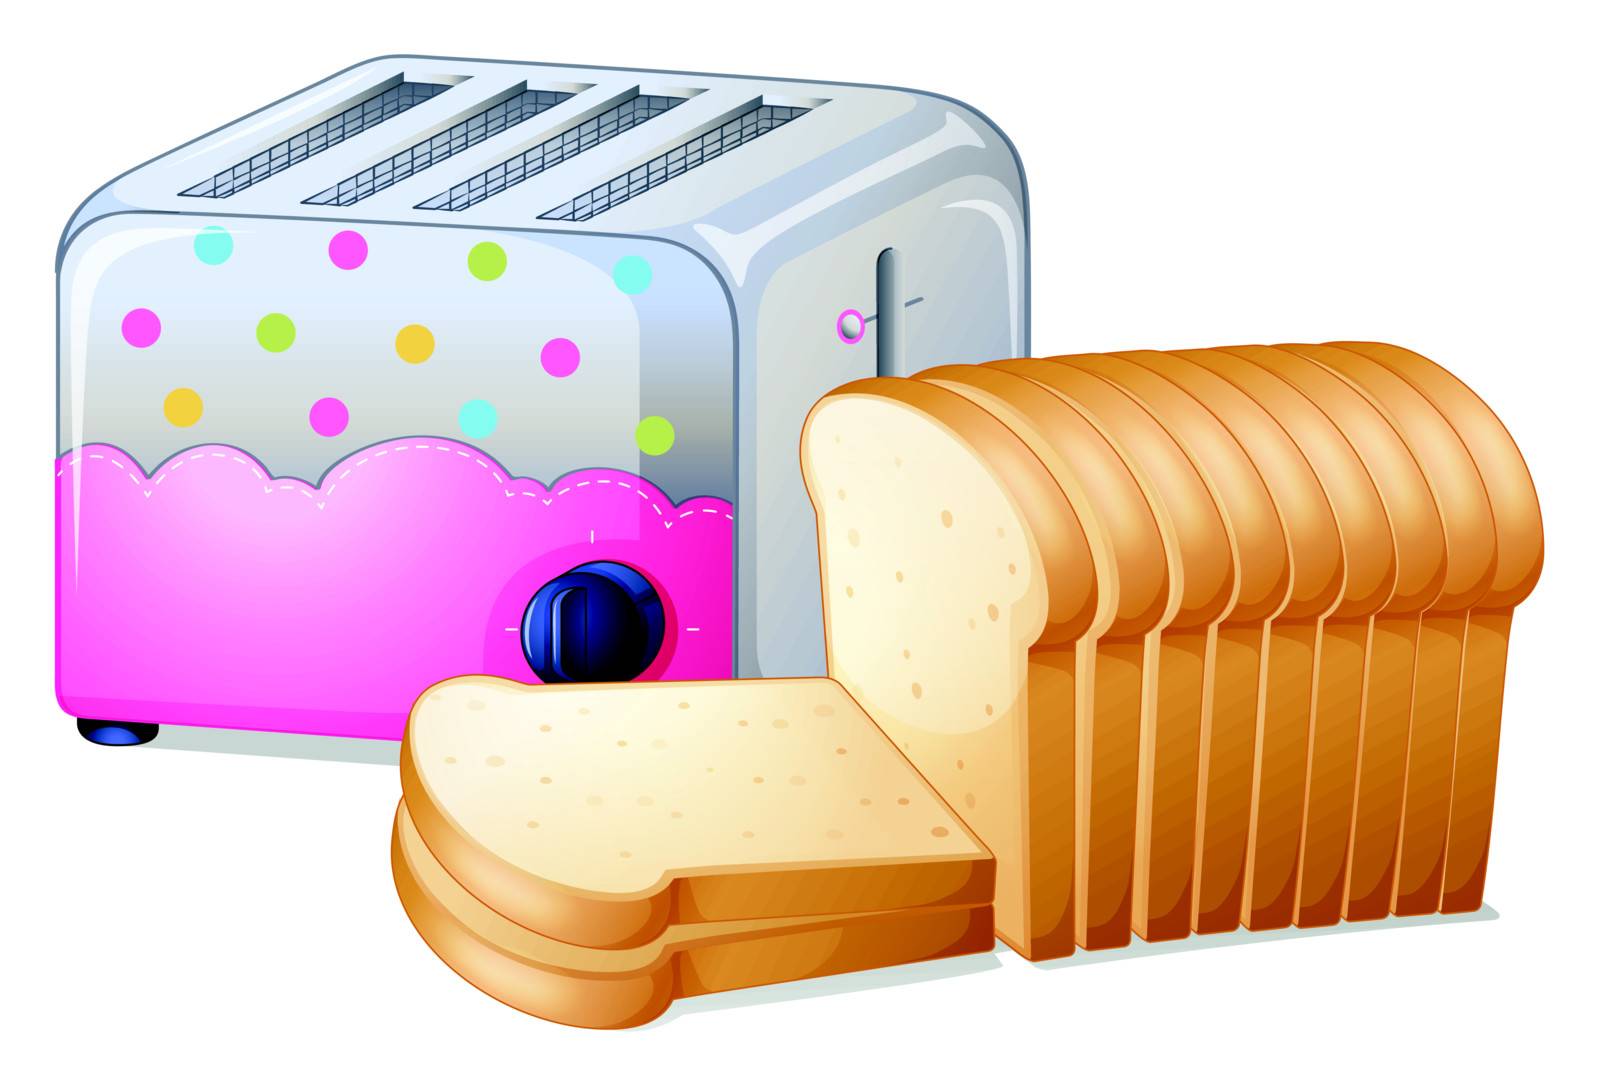 Illustration of an oven toaster and slices of breads on a white background